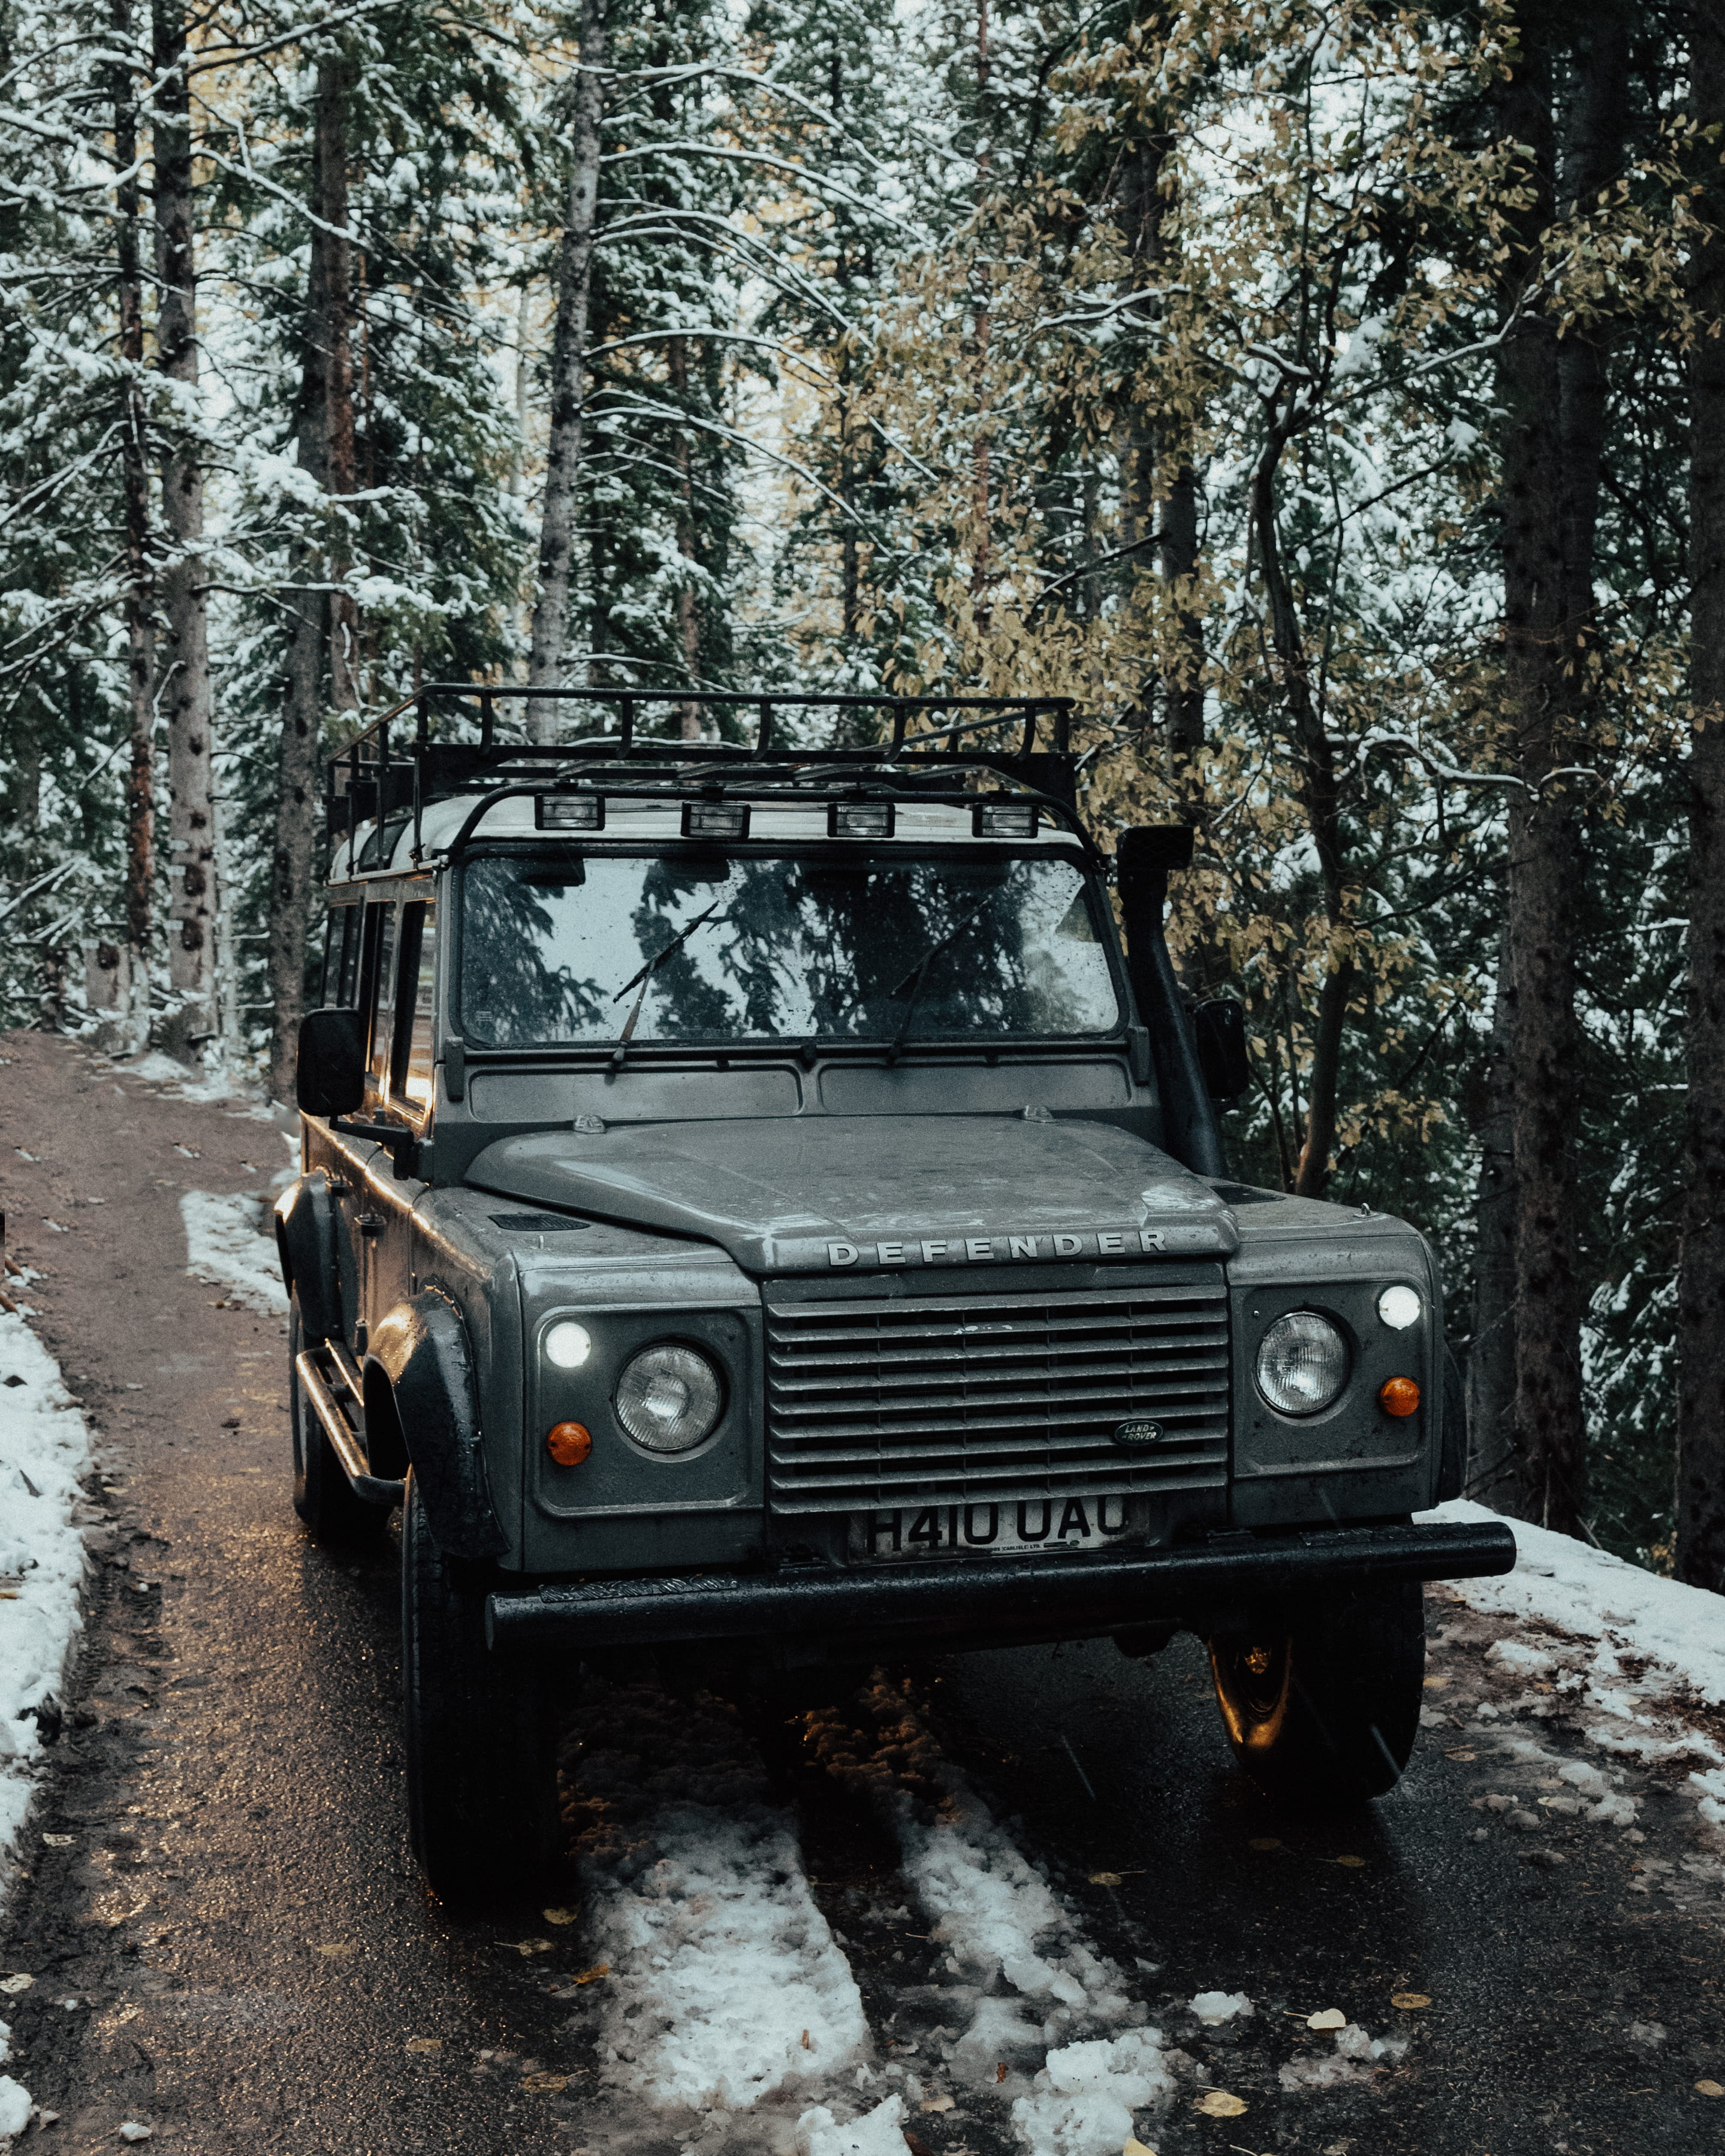 vehicle surround with trees, winter, land rover defender, fall